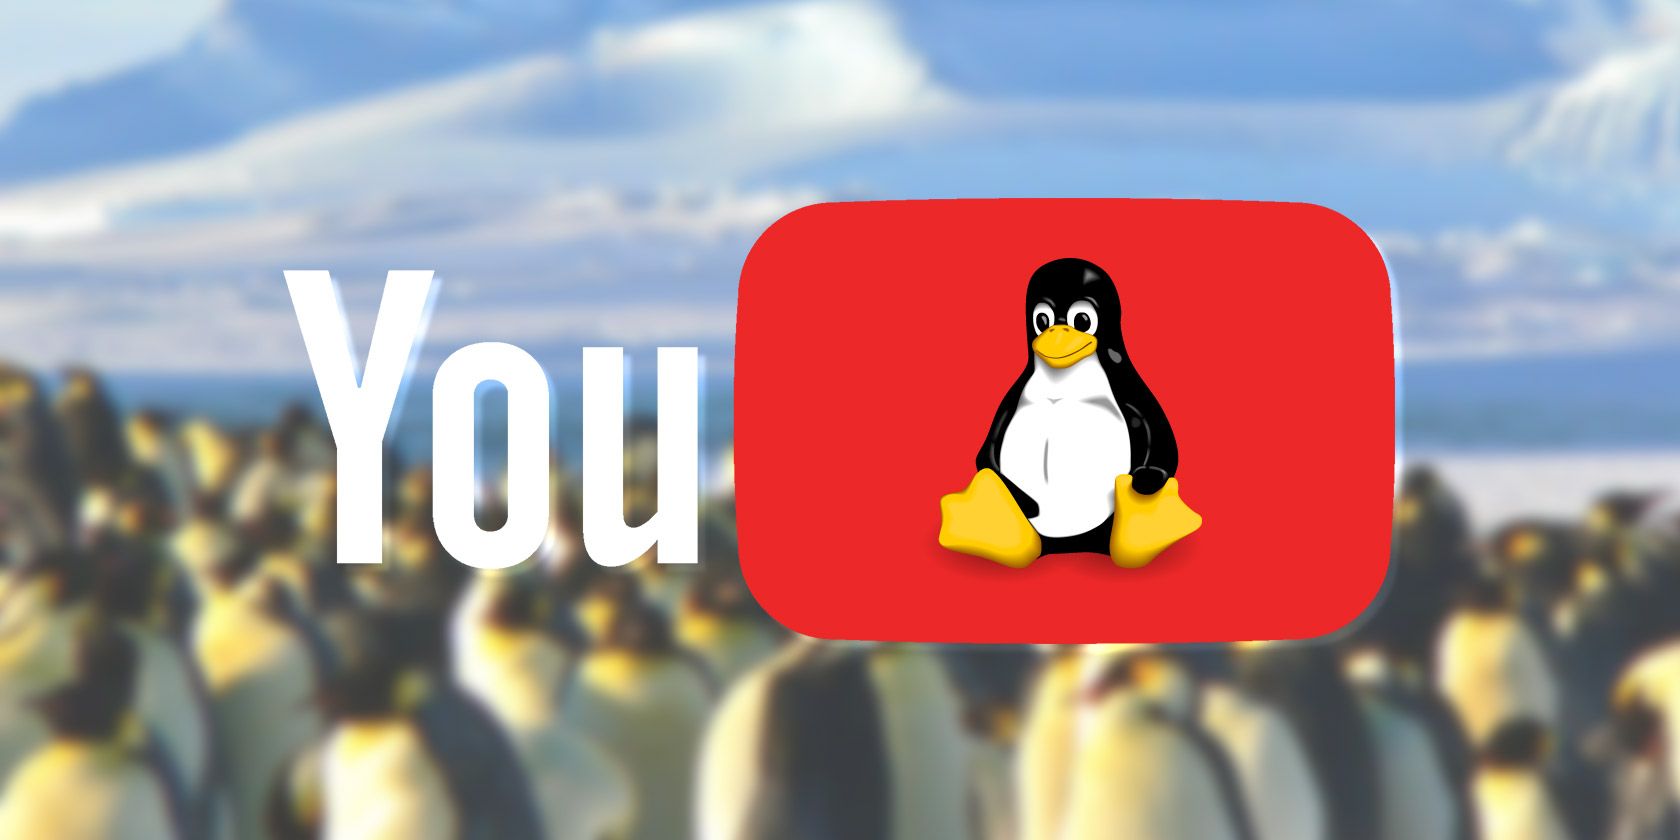 youtube download linux